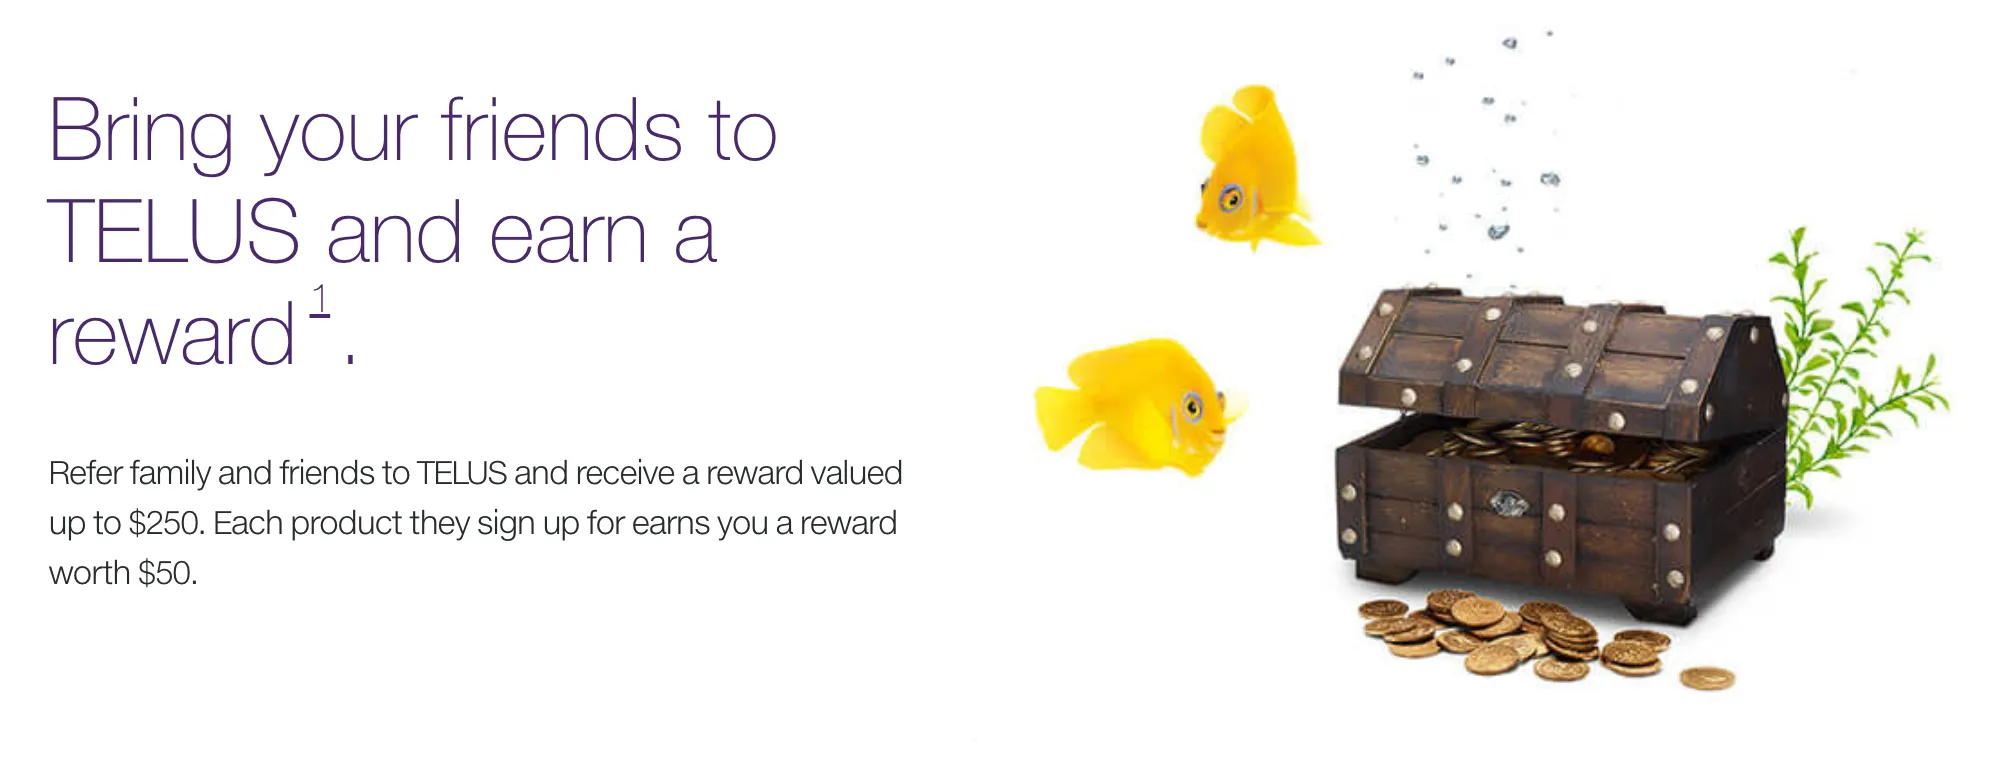 The image depicts a white background with text on the left side that says "Bring your friends to Telus and earn a reward." There is a subtext that explains how to participate in the program. On the right side, there is a chest full of money, and some coins are spilling out. Behind the chest, there is a green plant, and two yellow fish are floating next to it.